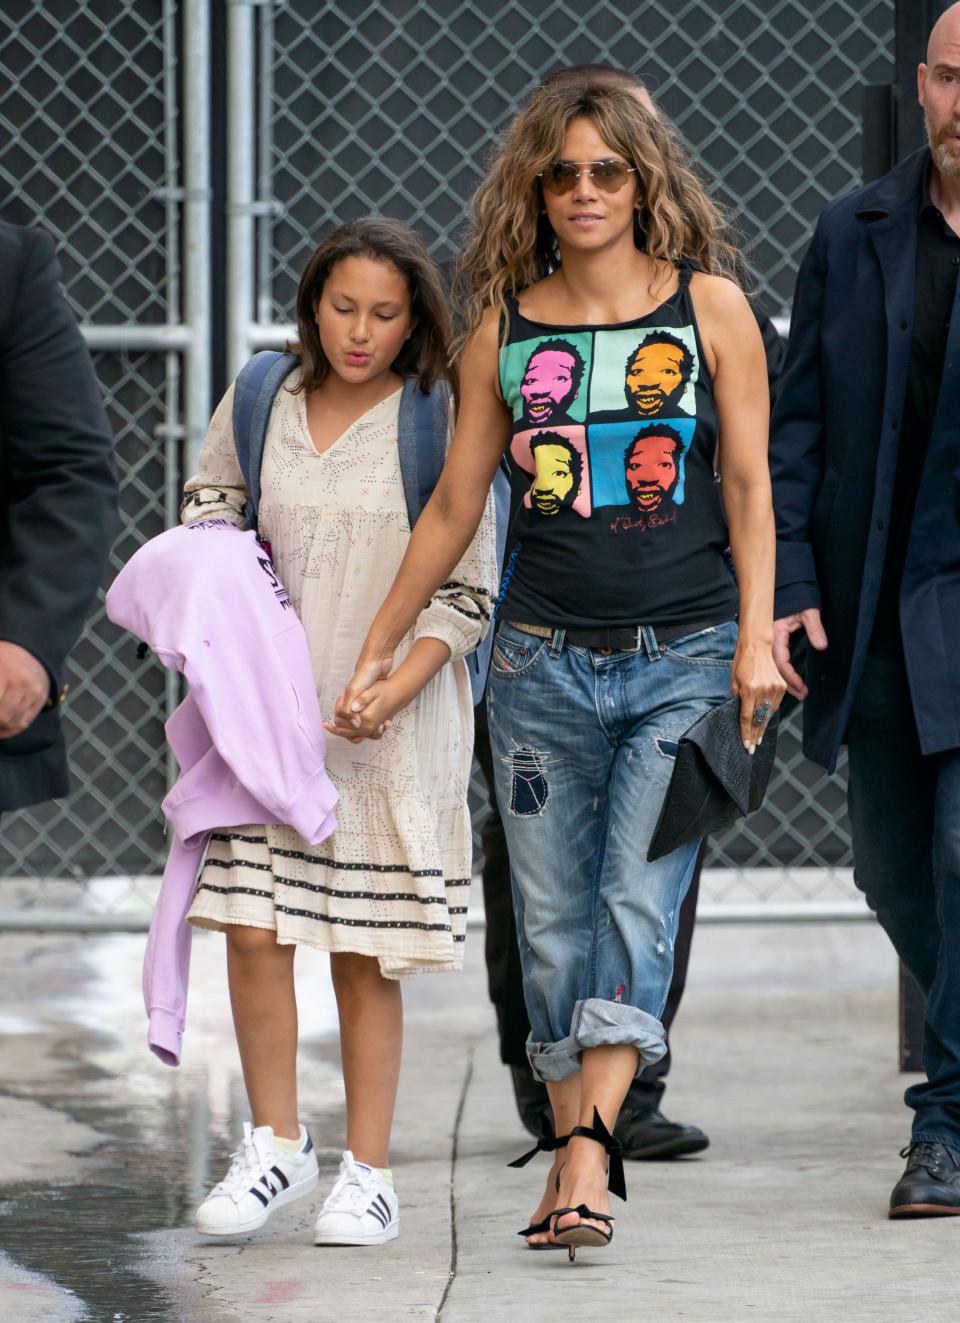 Halle Berry’s Daughter Nahla Aubry Is Growing Up So Fast! Rare Photos